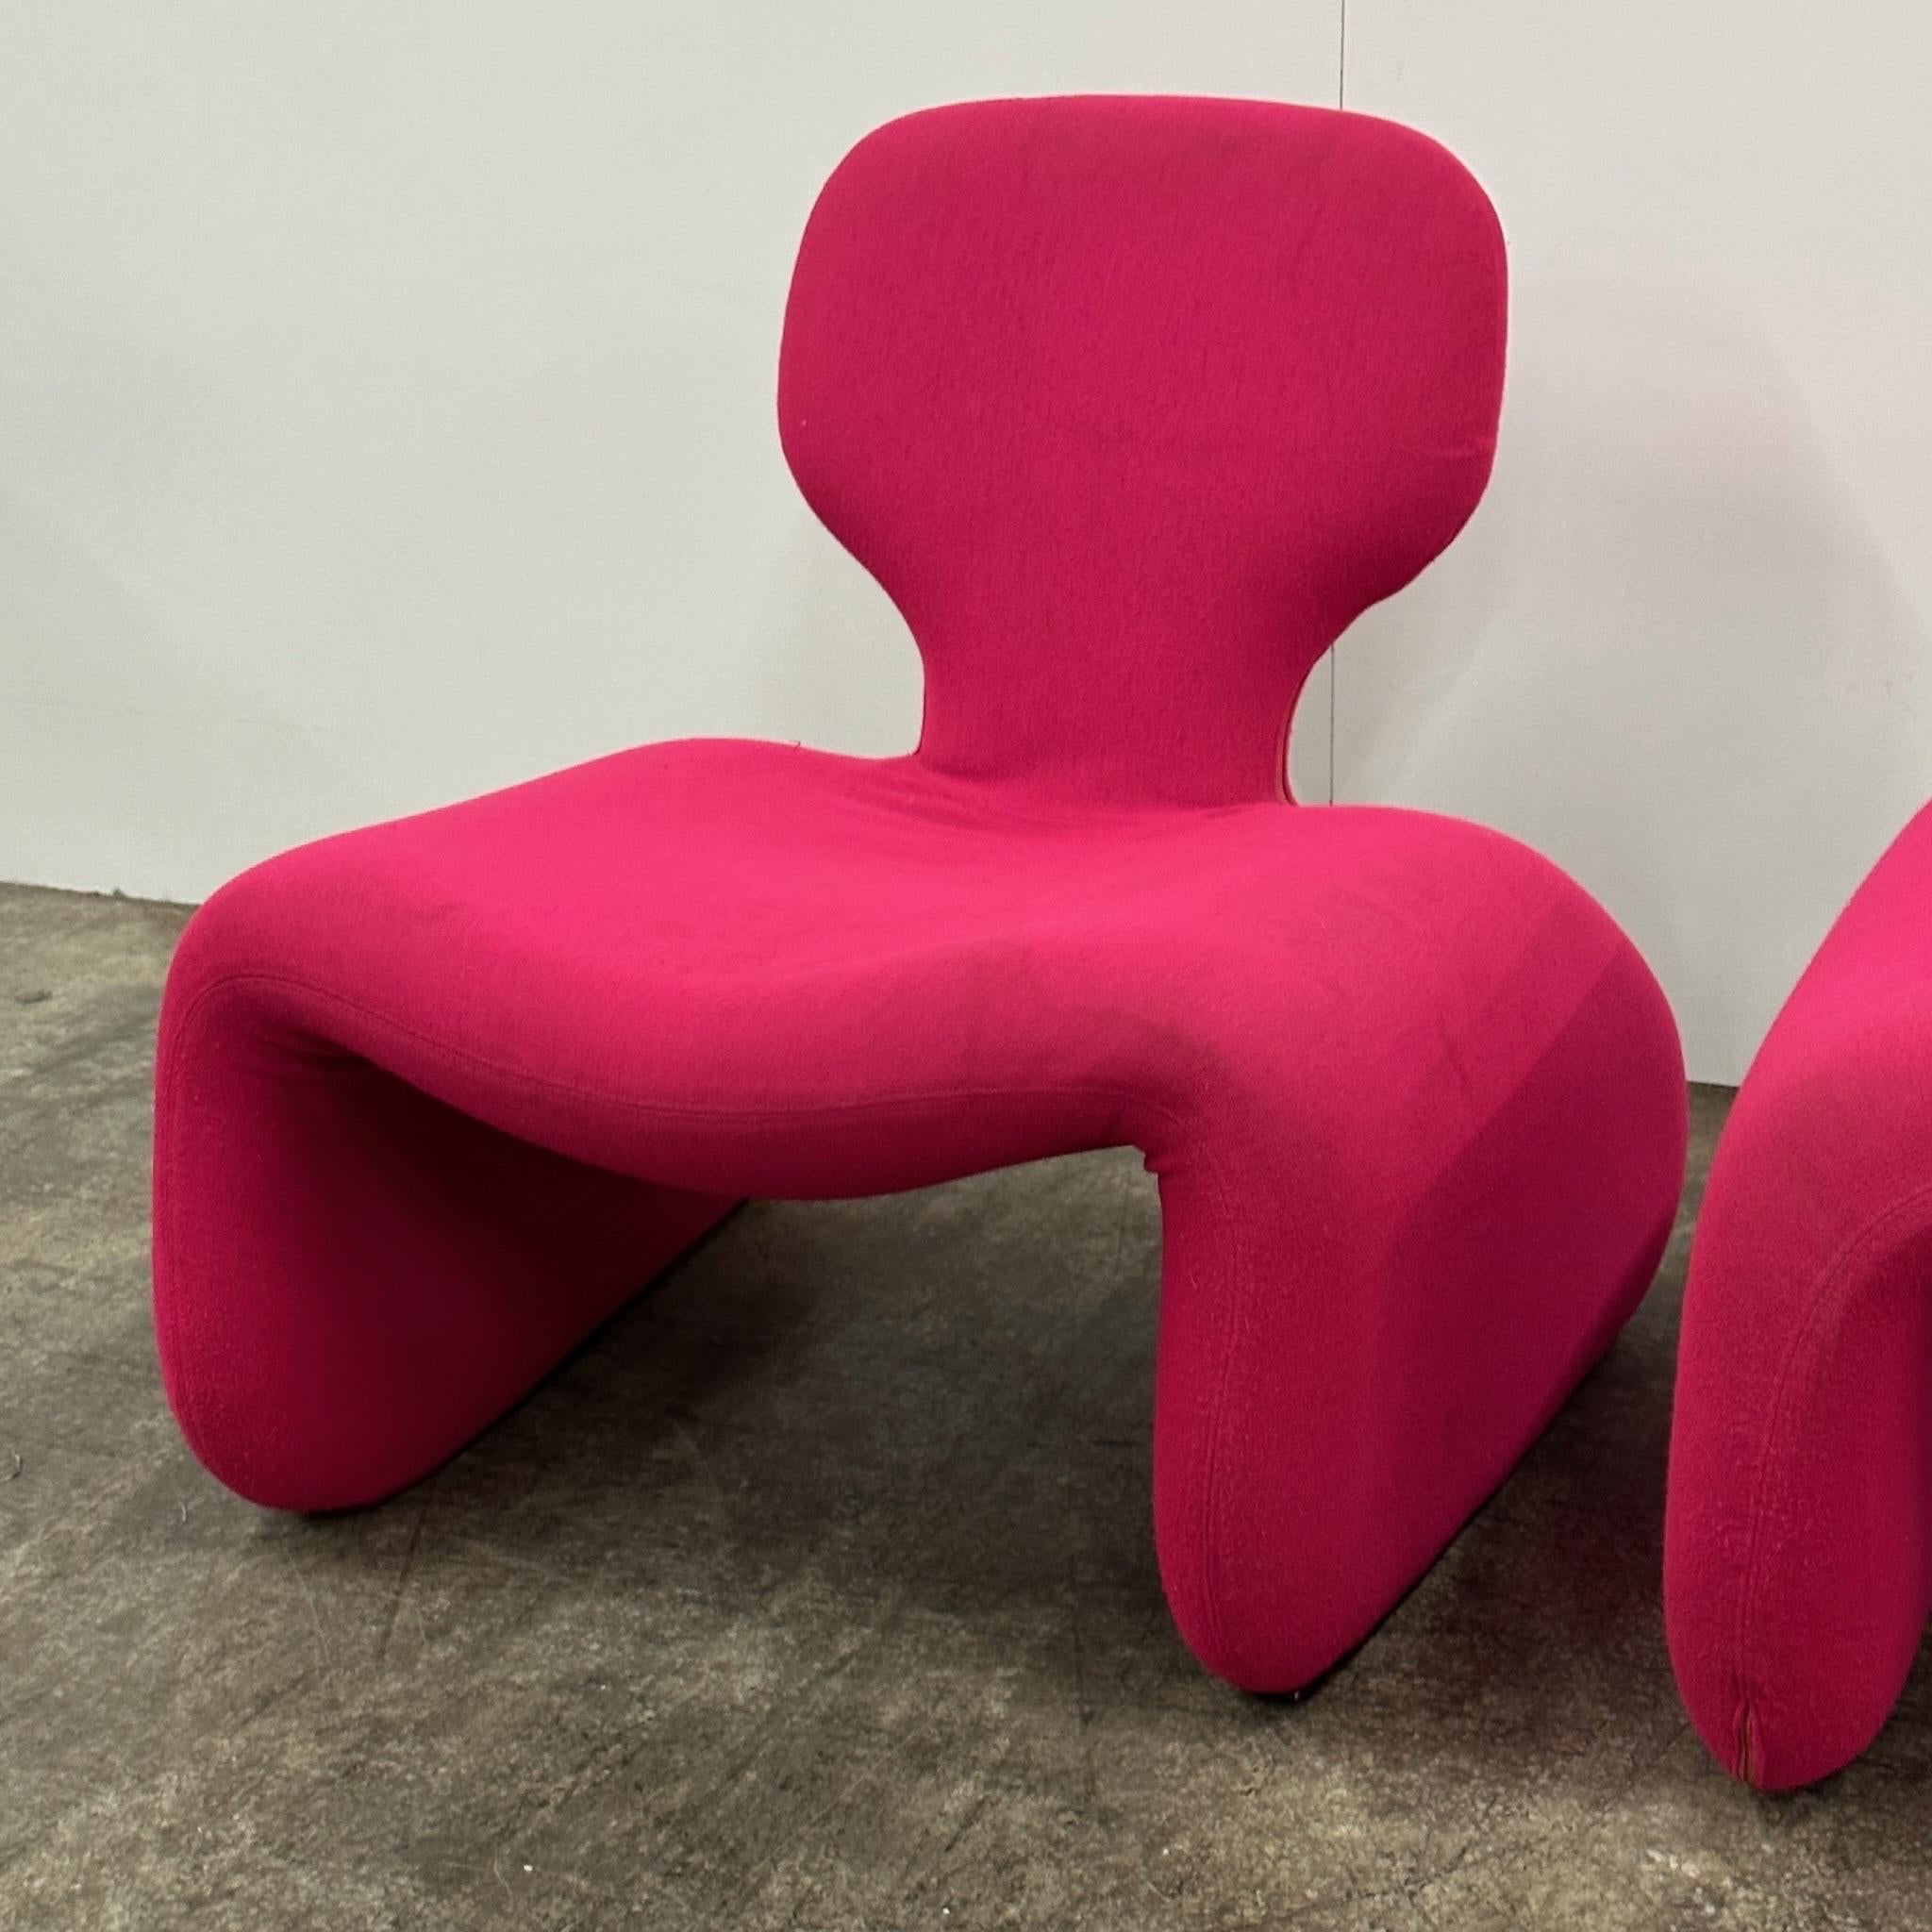 Upholstery Djinn Chair + Ottoman by Olivier Mourgue for Airborne